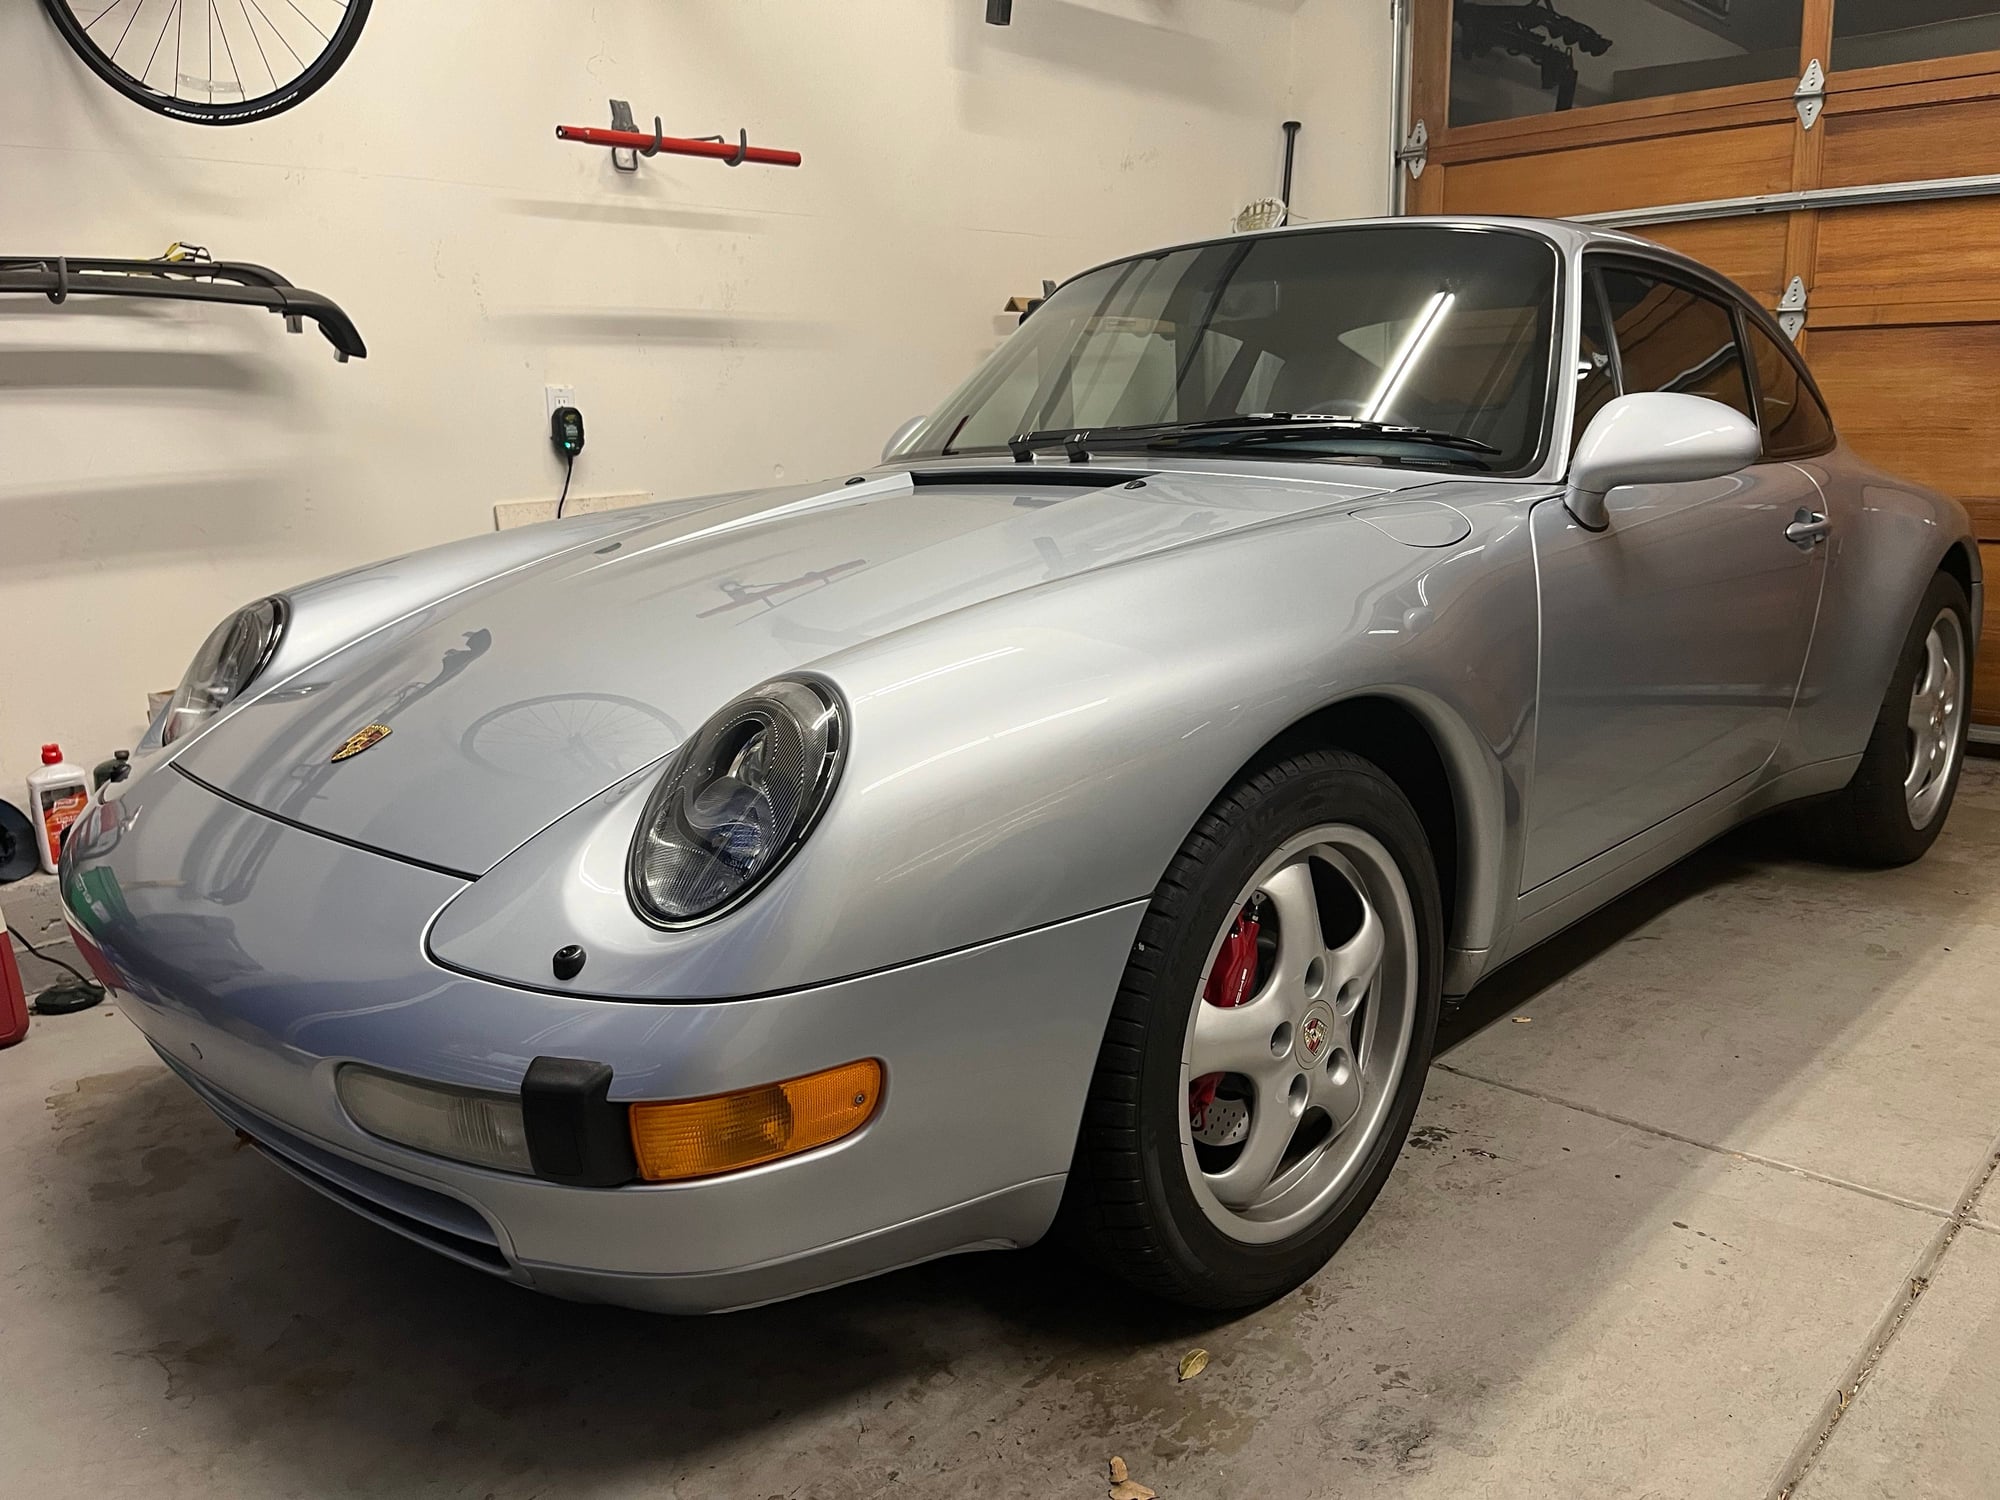 1995 Porsche 911 - Pristine 1995 993 C2 Manual for sale - Used - VIN WP0AA2990SS322594 - 6 cyl - 2WD - Manual - Coupe - Silver - Orinda, CA 94563, United States